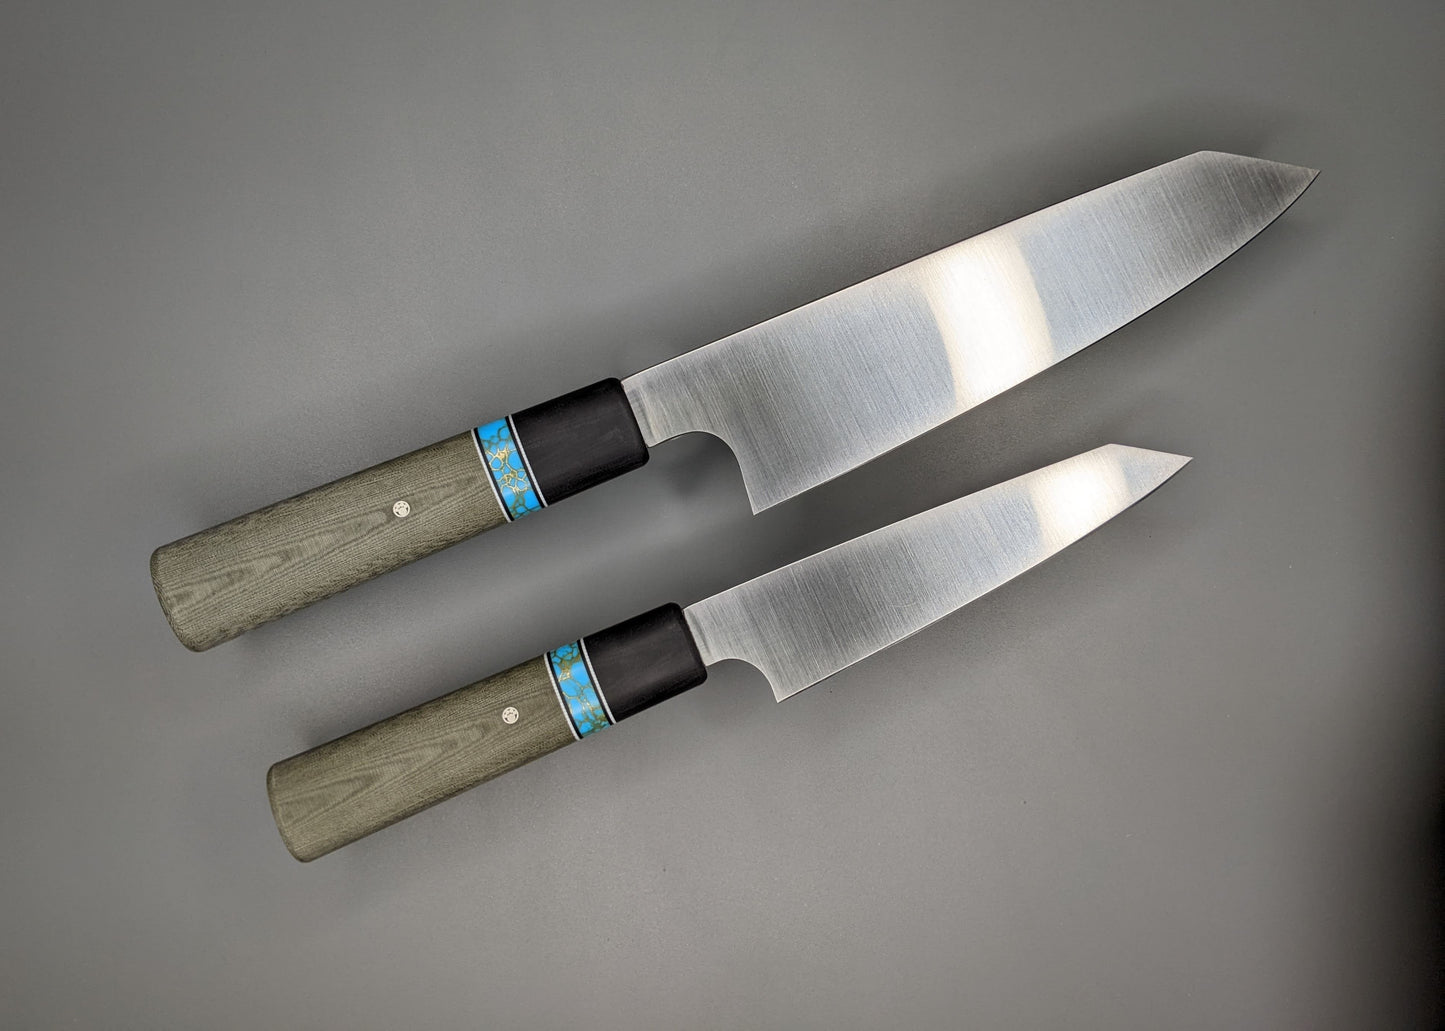 two K-tip kitchen knives with green handles as a gift set